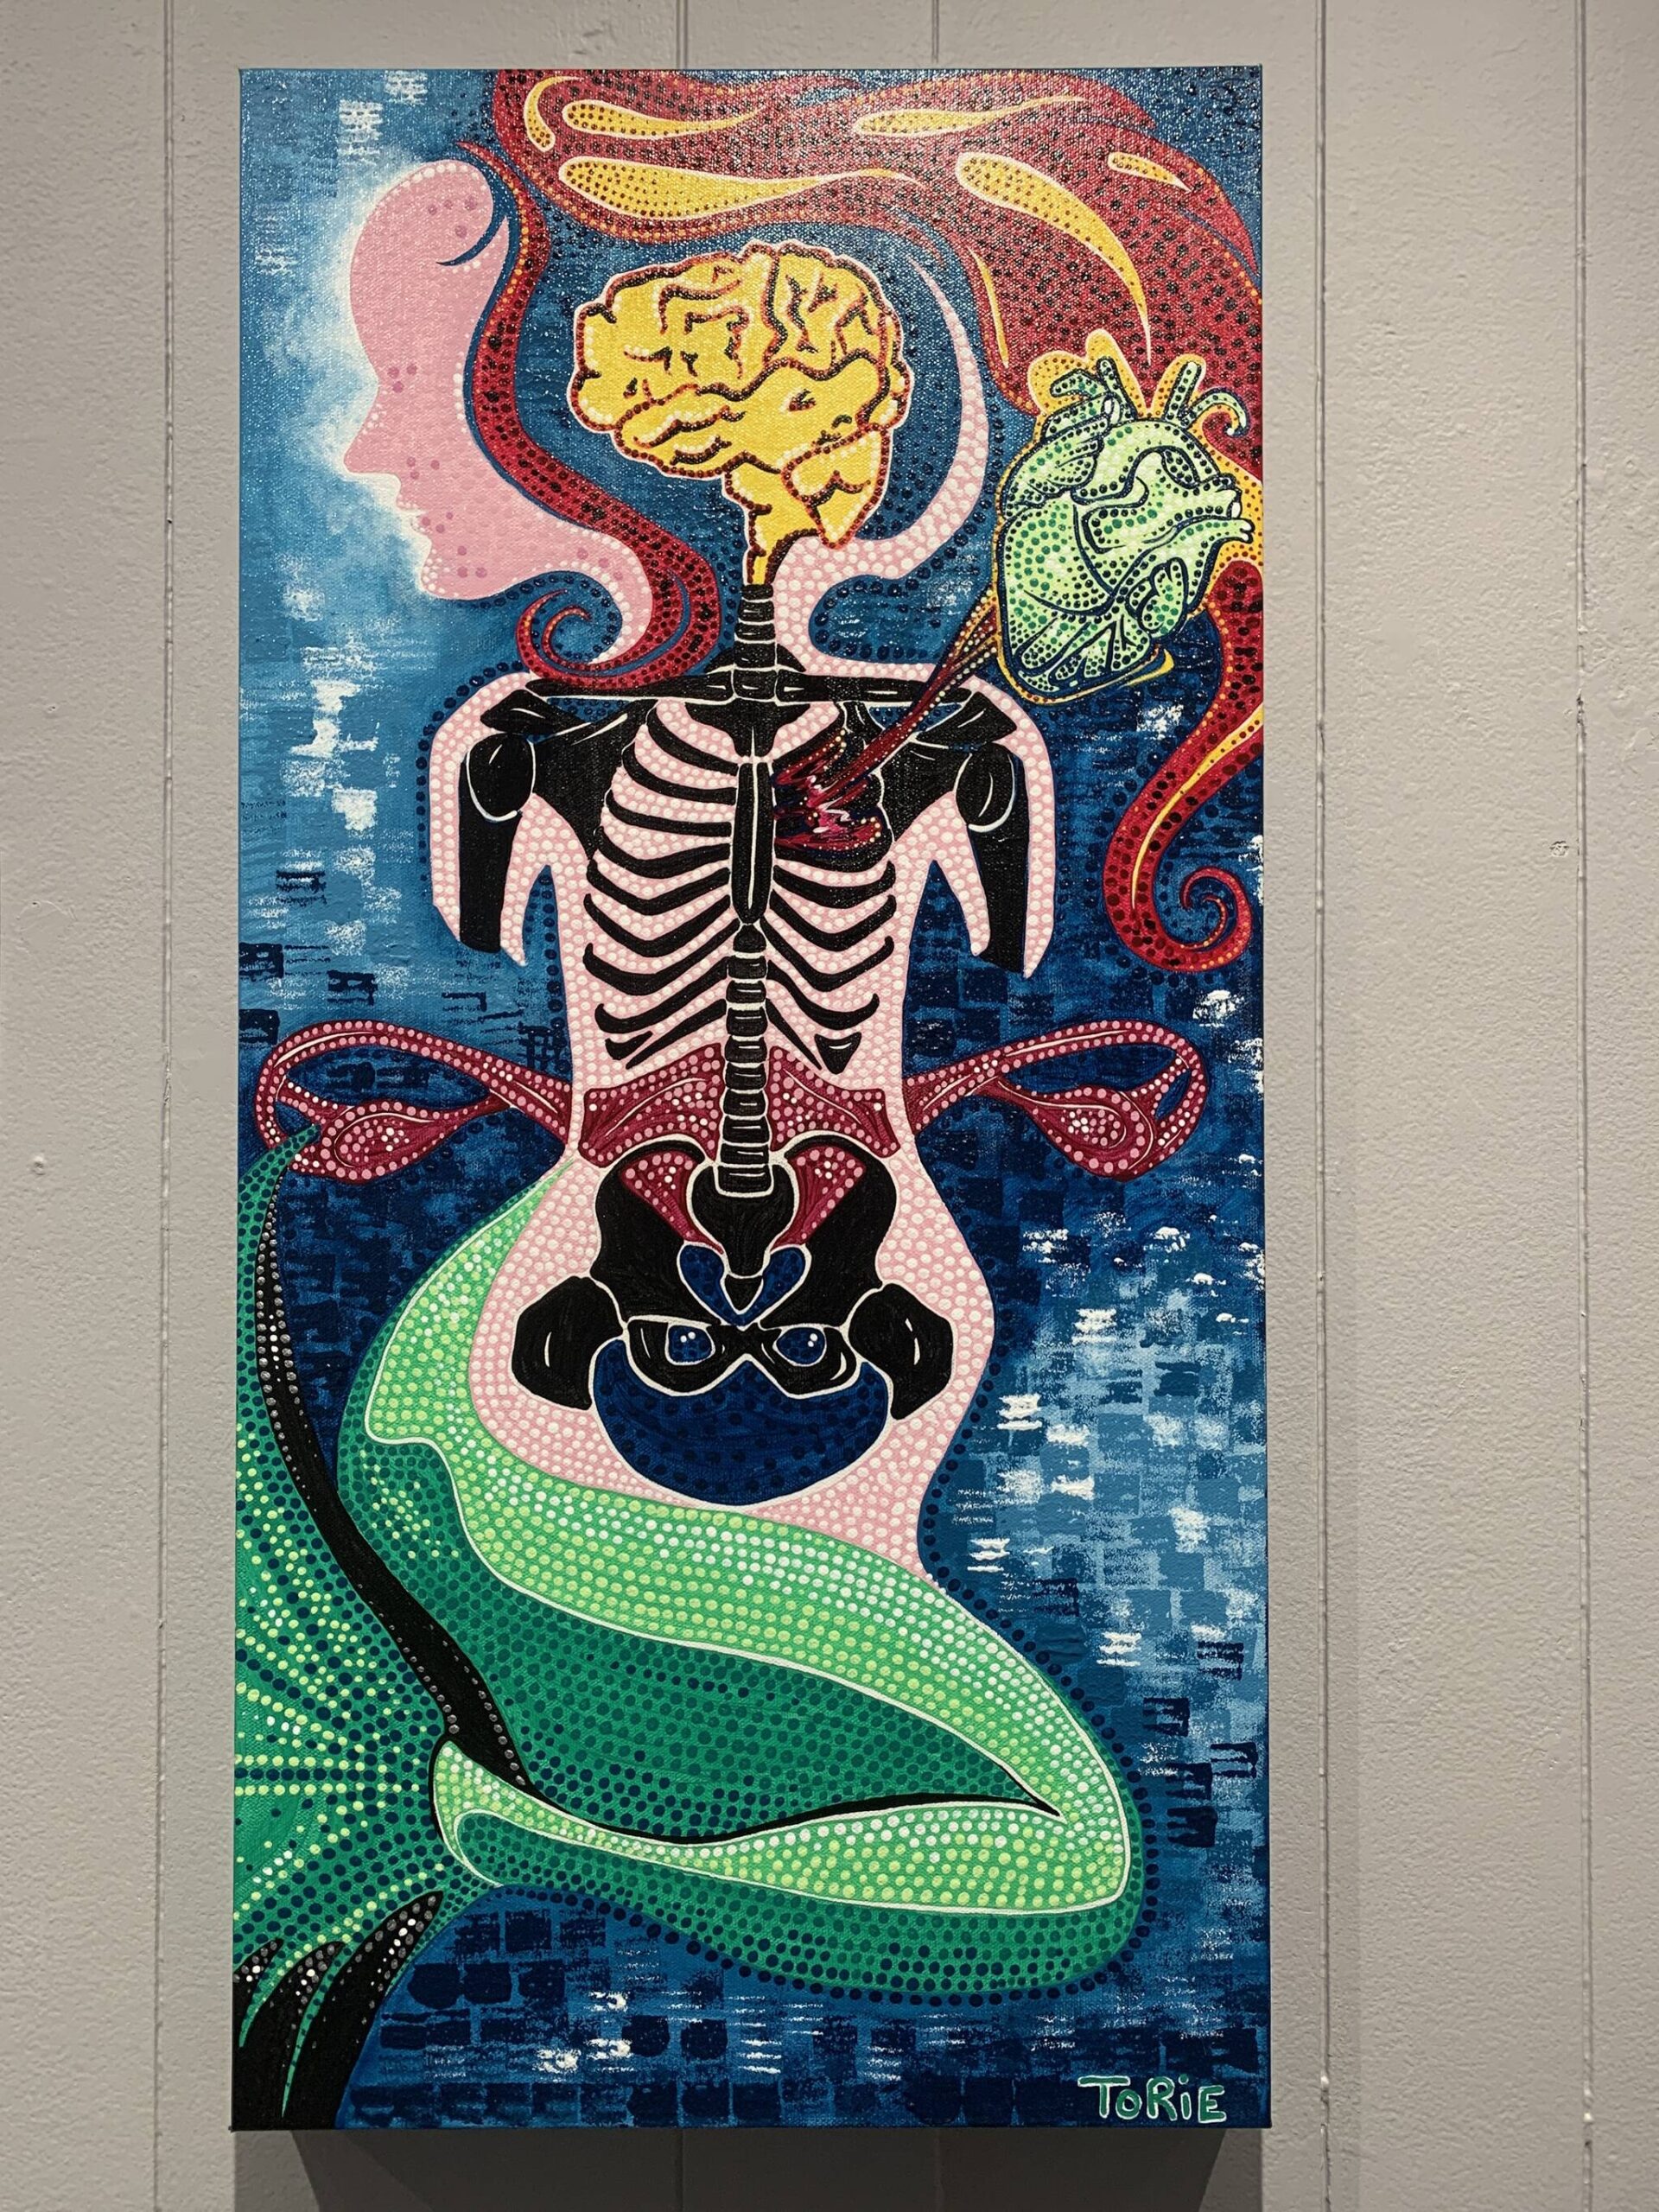 “My Own,” acrylic on canvas by Torie Rhyan, is on display March 16 at Homer Council on the Arts through March as part of the “Bodily Autonomy” exhibit co-sponsored by Kachemak Bay Family Planning Clinic. (Photo by Christina Whiting/Homer News)